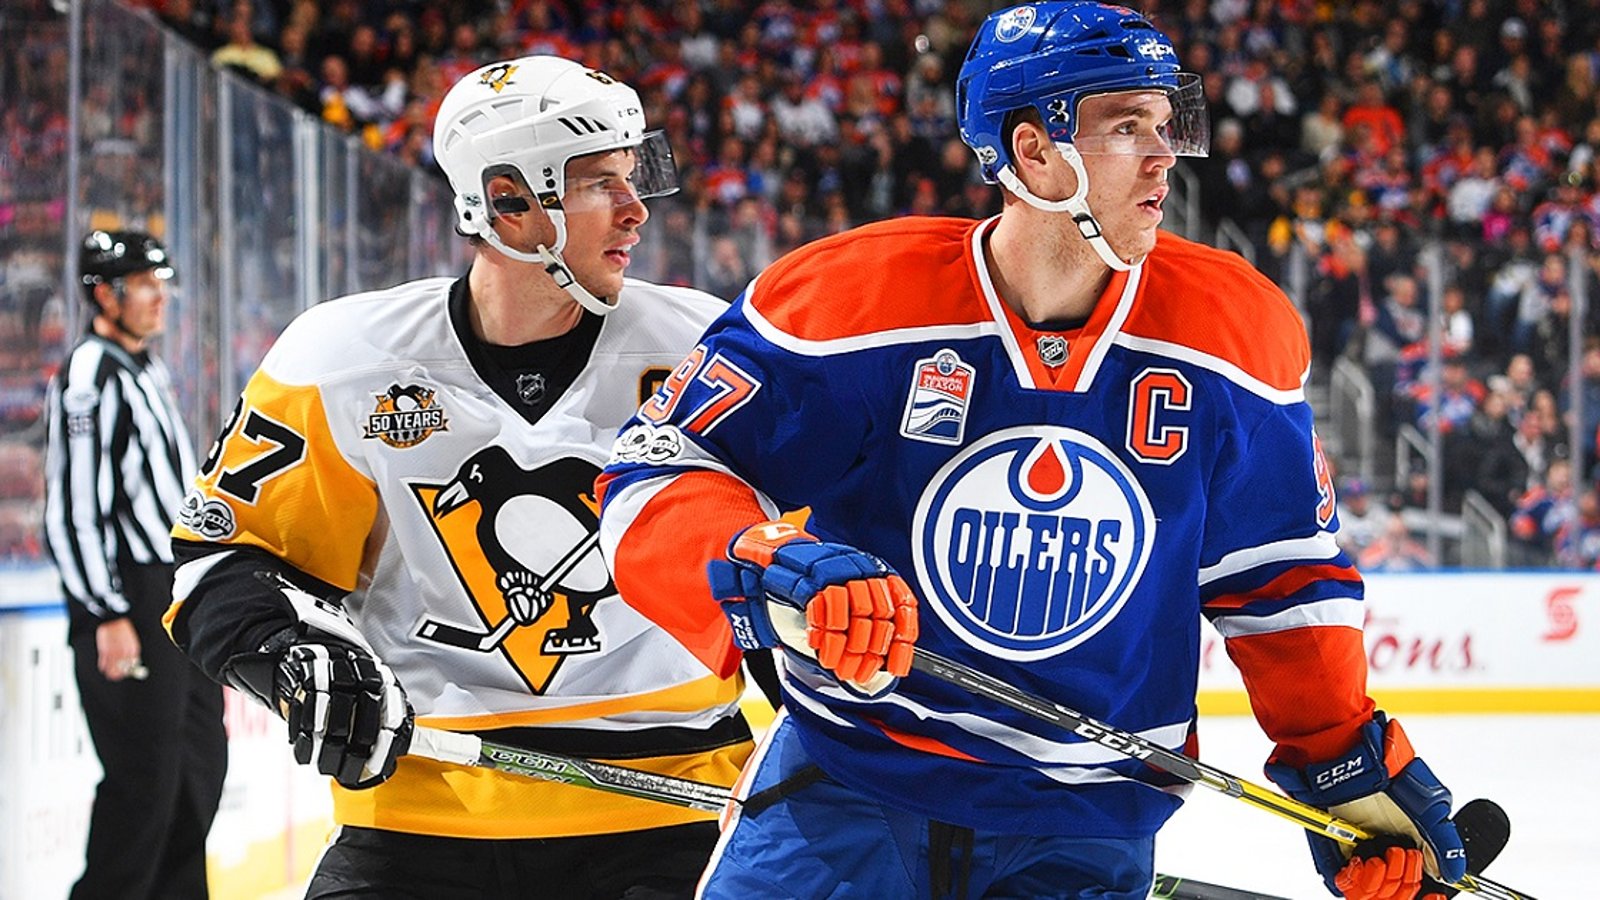 Sidney Crosby & Connor McDavid called out by NBA star Enes Freedom.